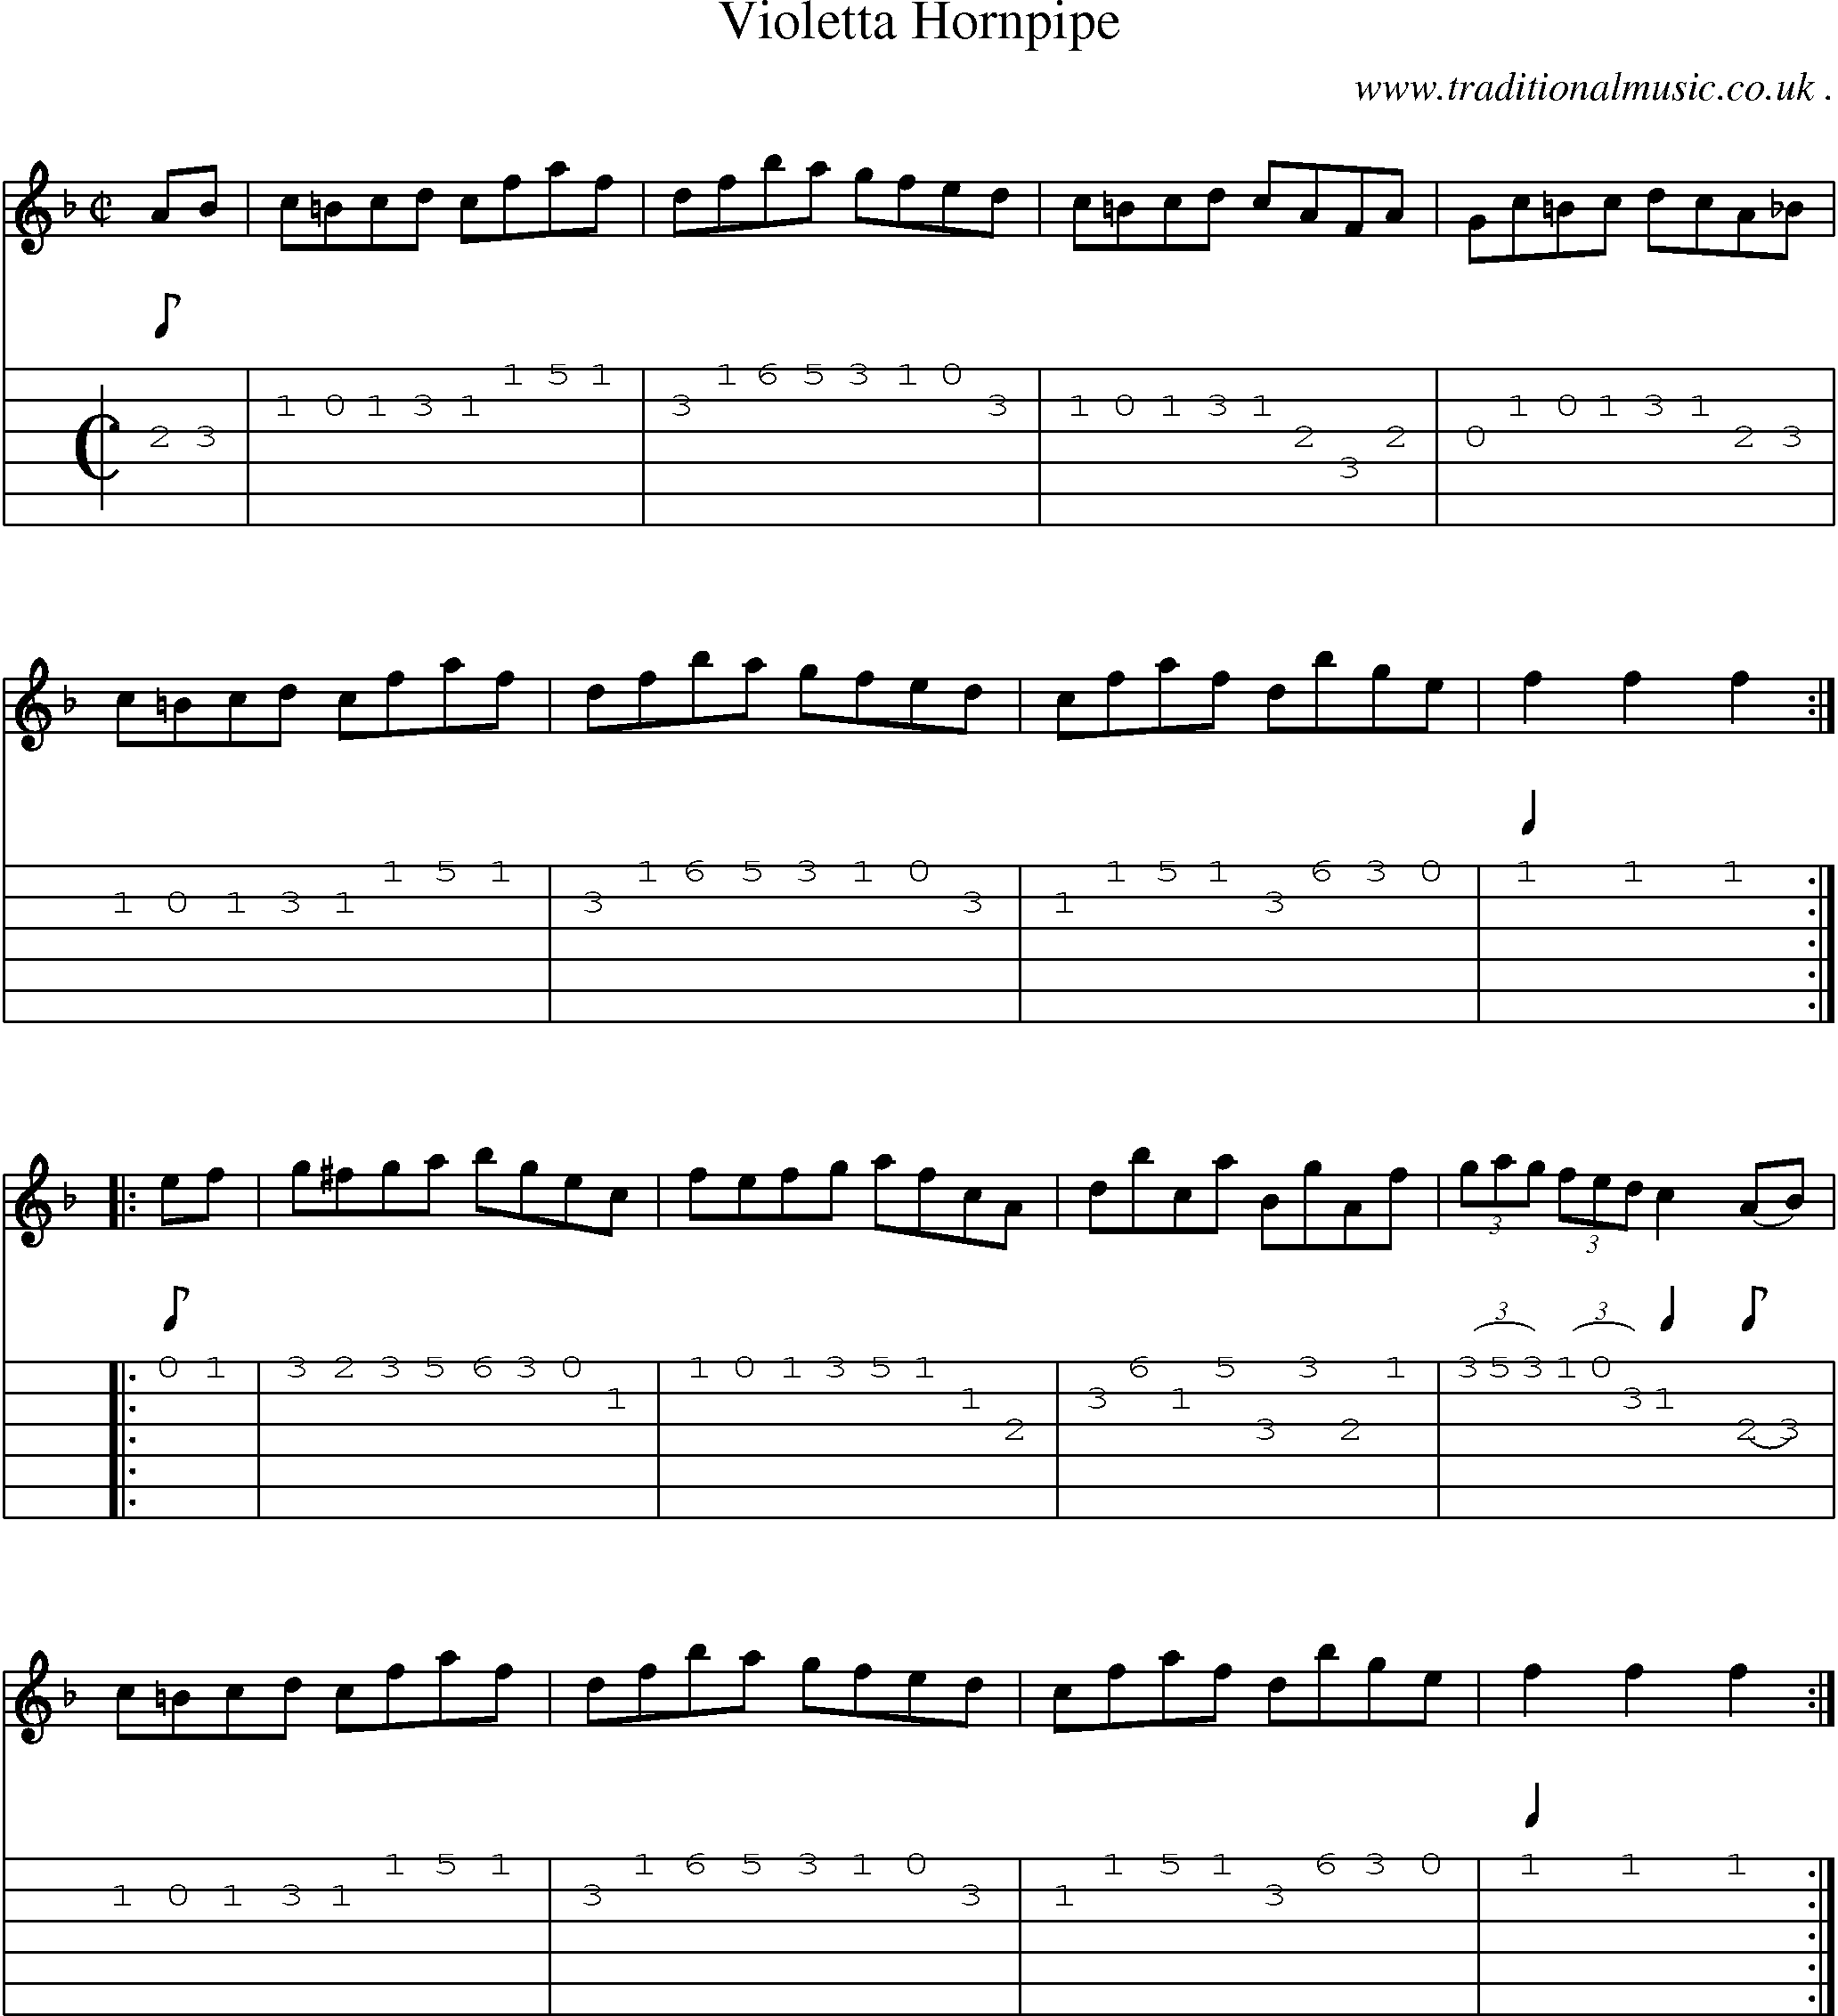 Sheet-Music and Guitar Tabs for Violetta Hornpipe